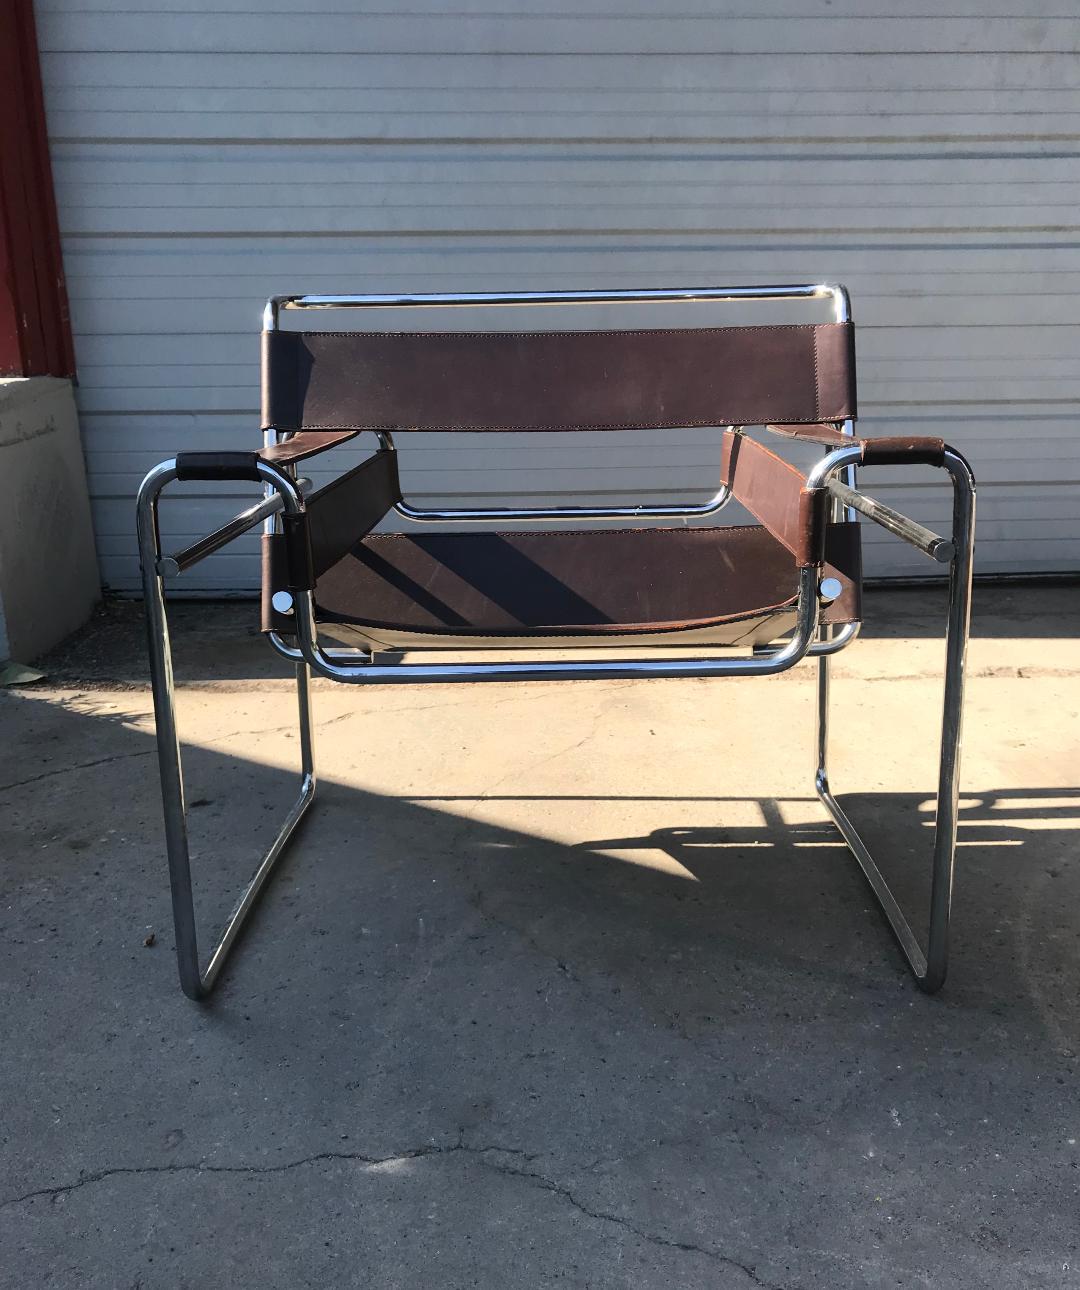 An iconic Marcel Breuer for Knoll Wassily chairs with tubular chrome frame and brown leather. No caps on the ends of the tubular frame. One continuous piece of metal.

Creator: Marcel Breuer for Knoll.
Date of manufacture: circa